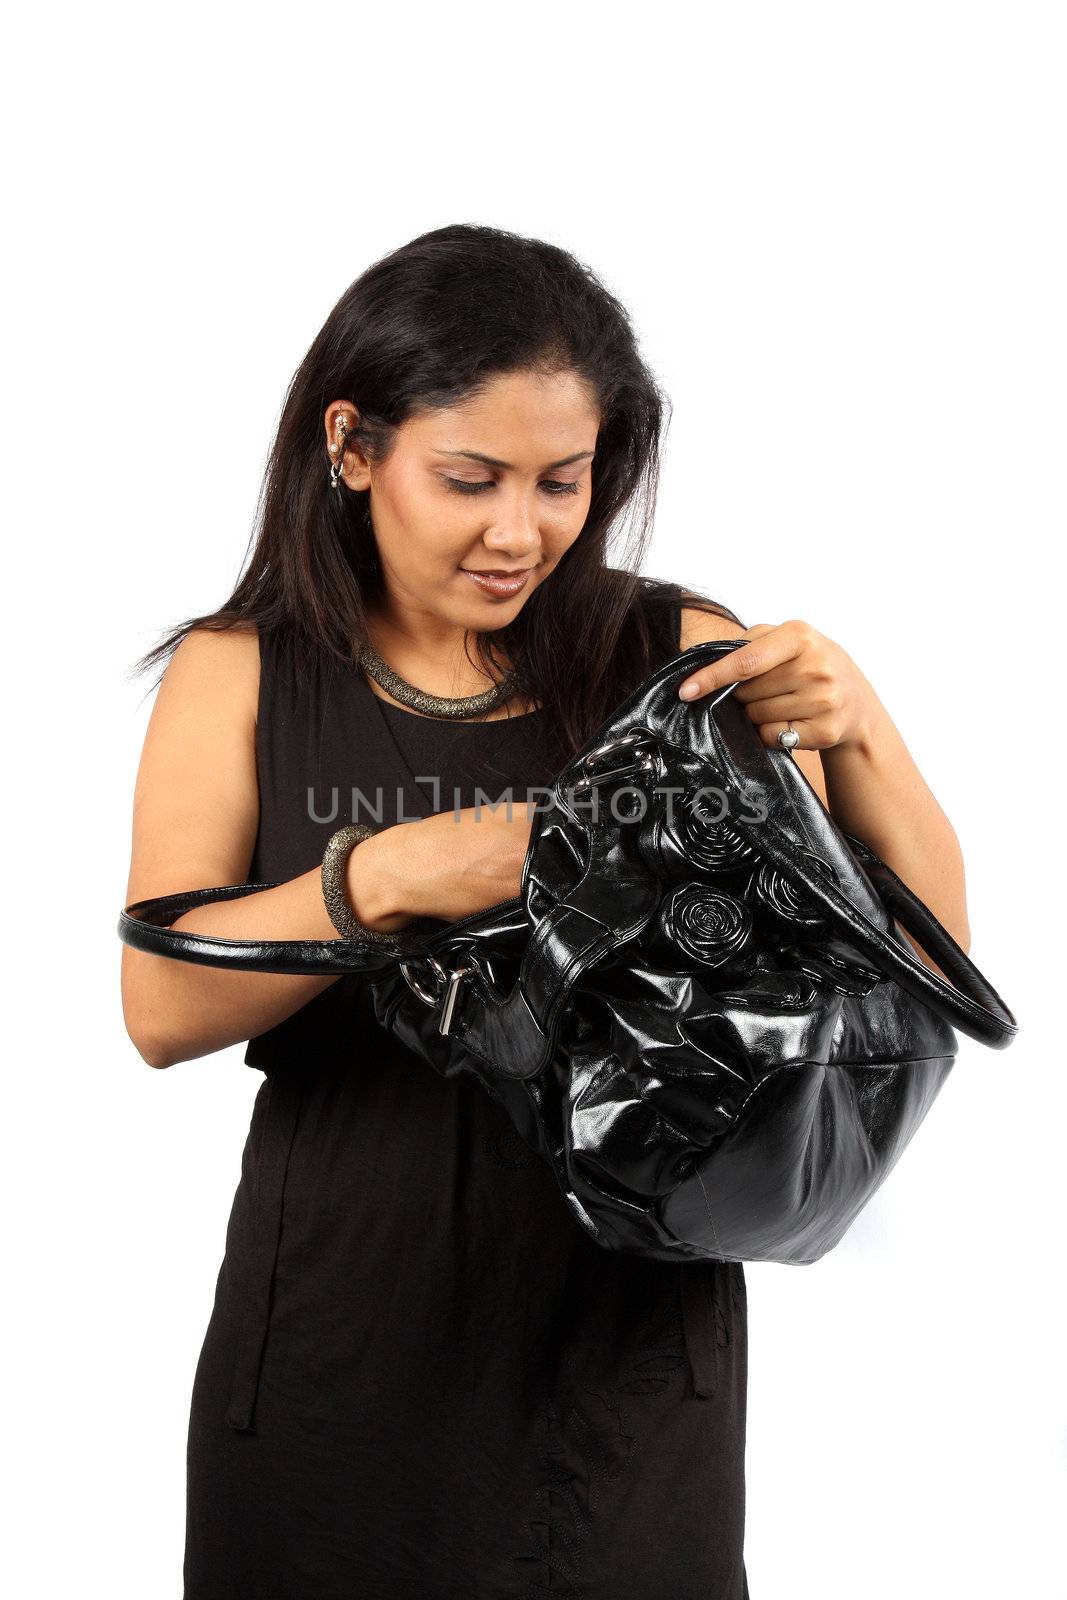 A beautiful Indian woman checking contents of her black handbag, on white studio background.